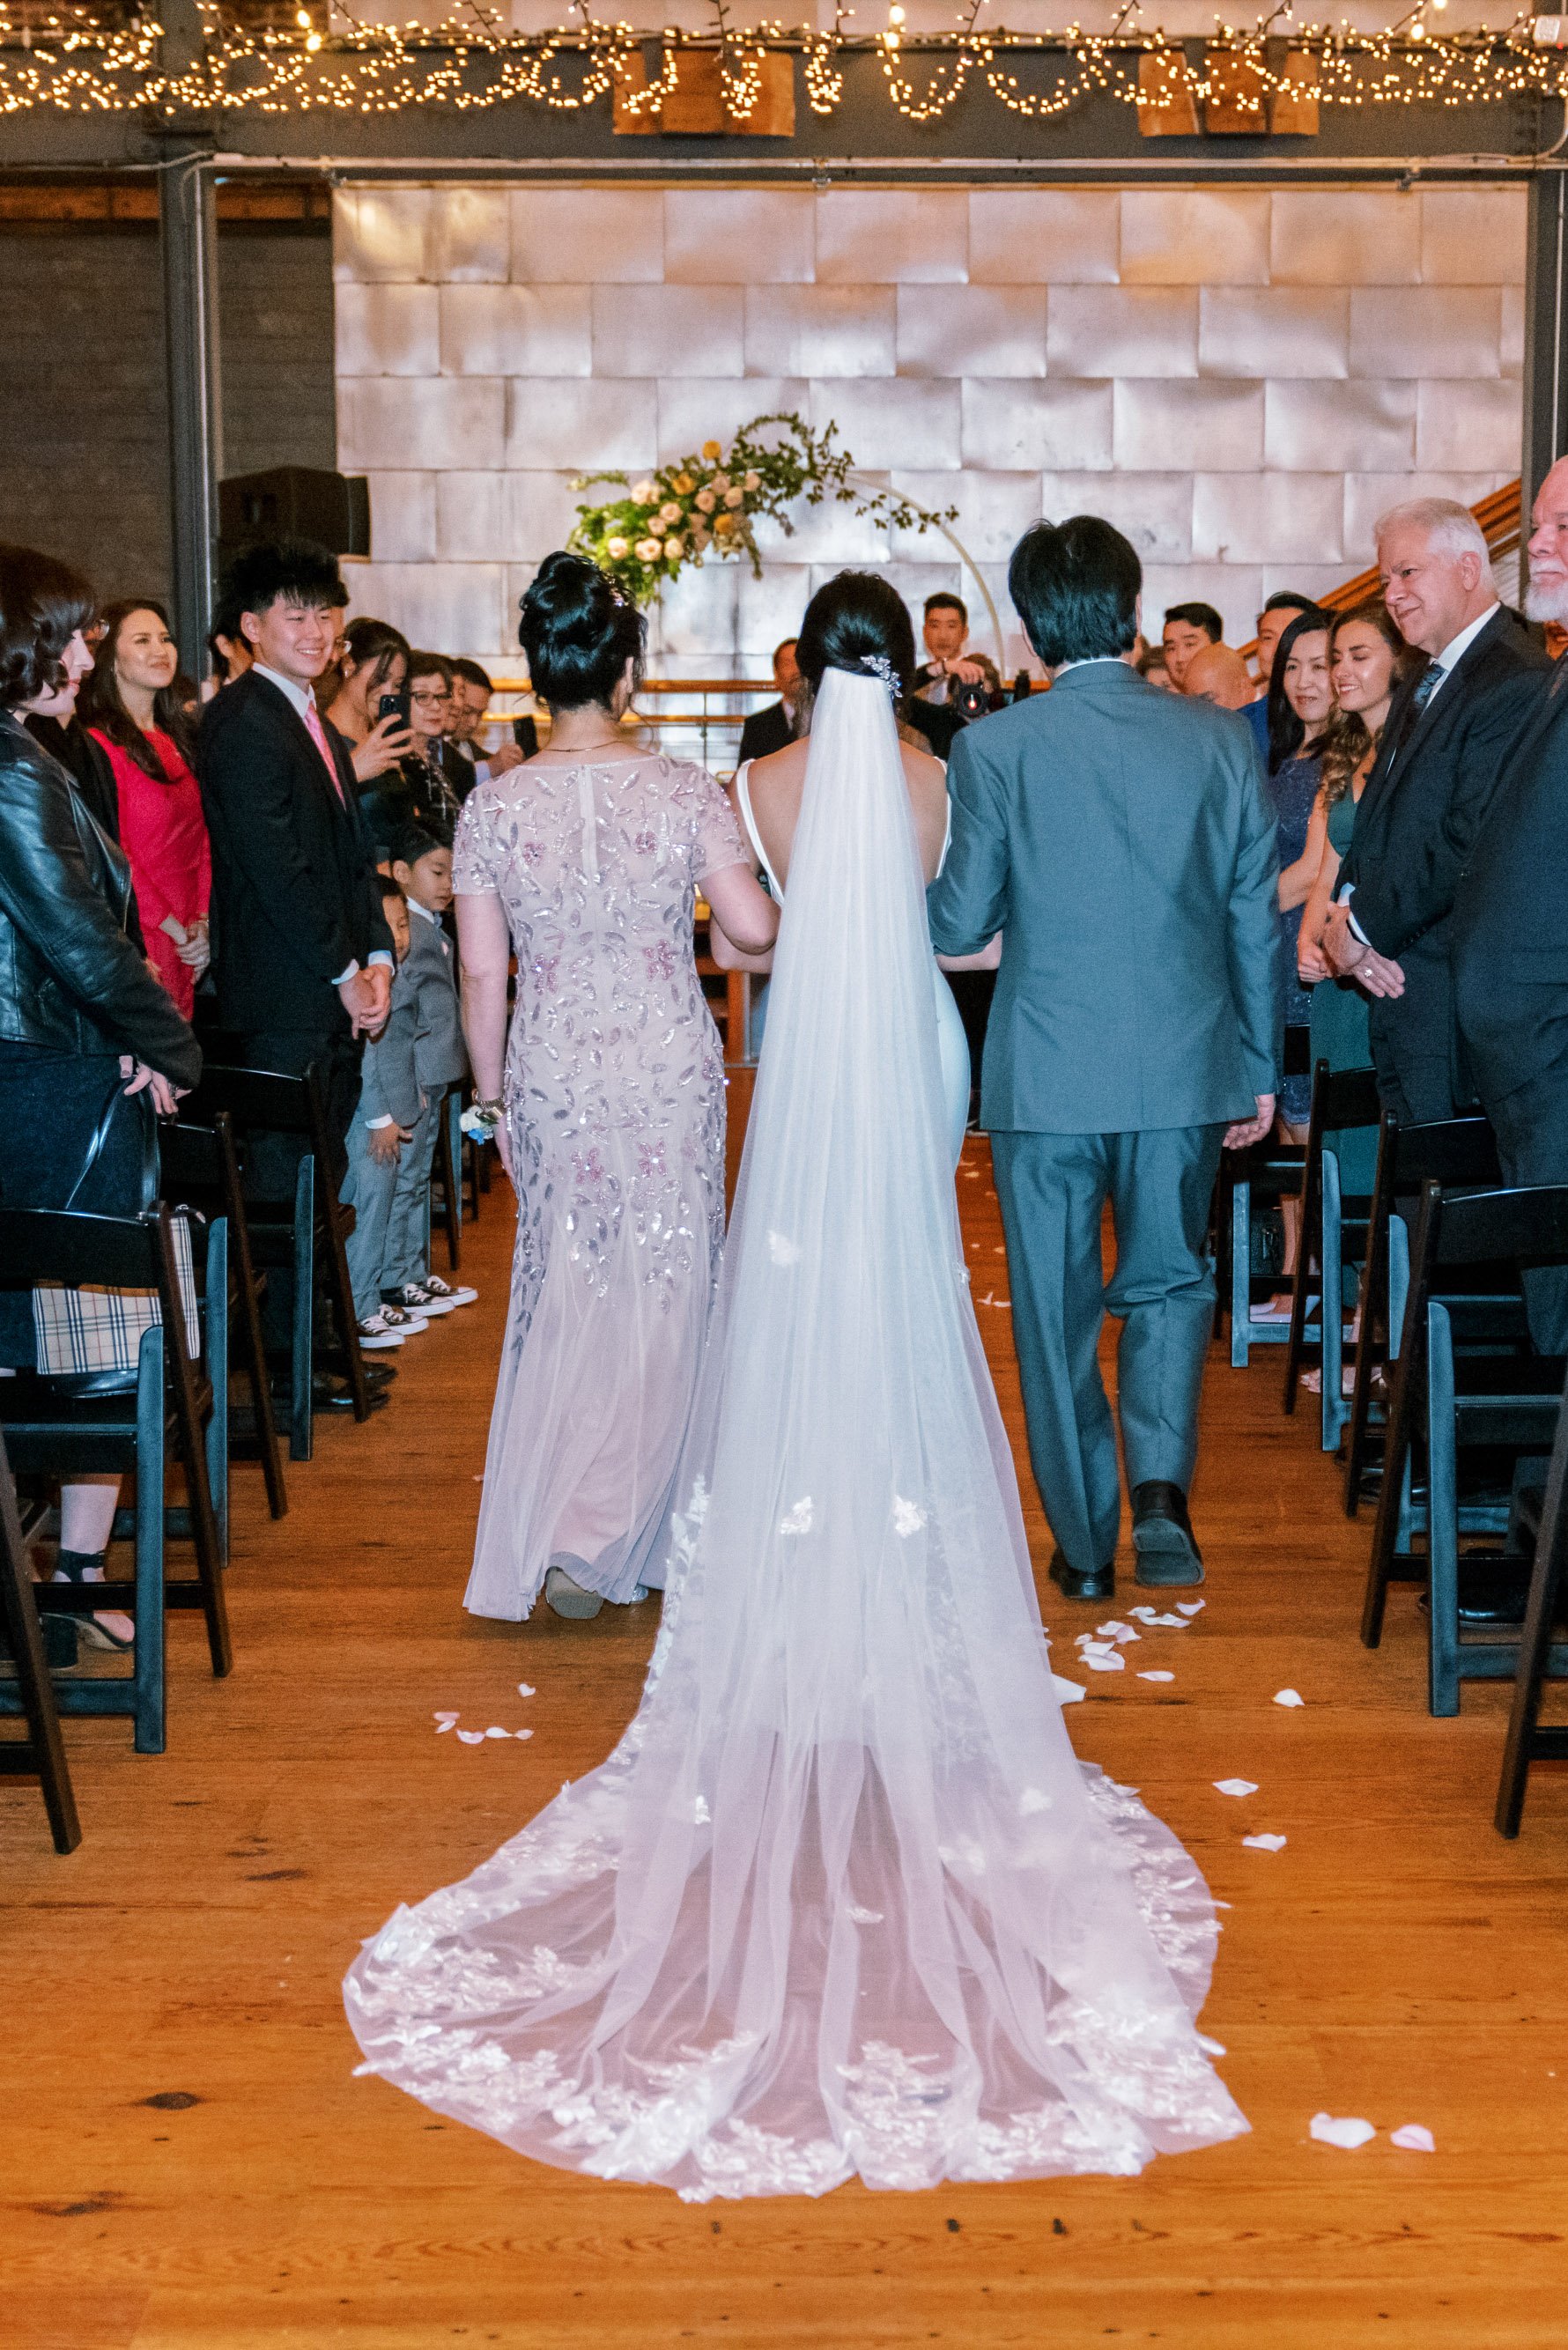 Bride Veil Train in Ceremony Wedding at Bay 7 Durham NC Fancy This Photography